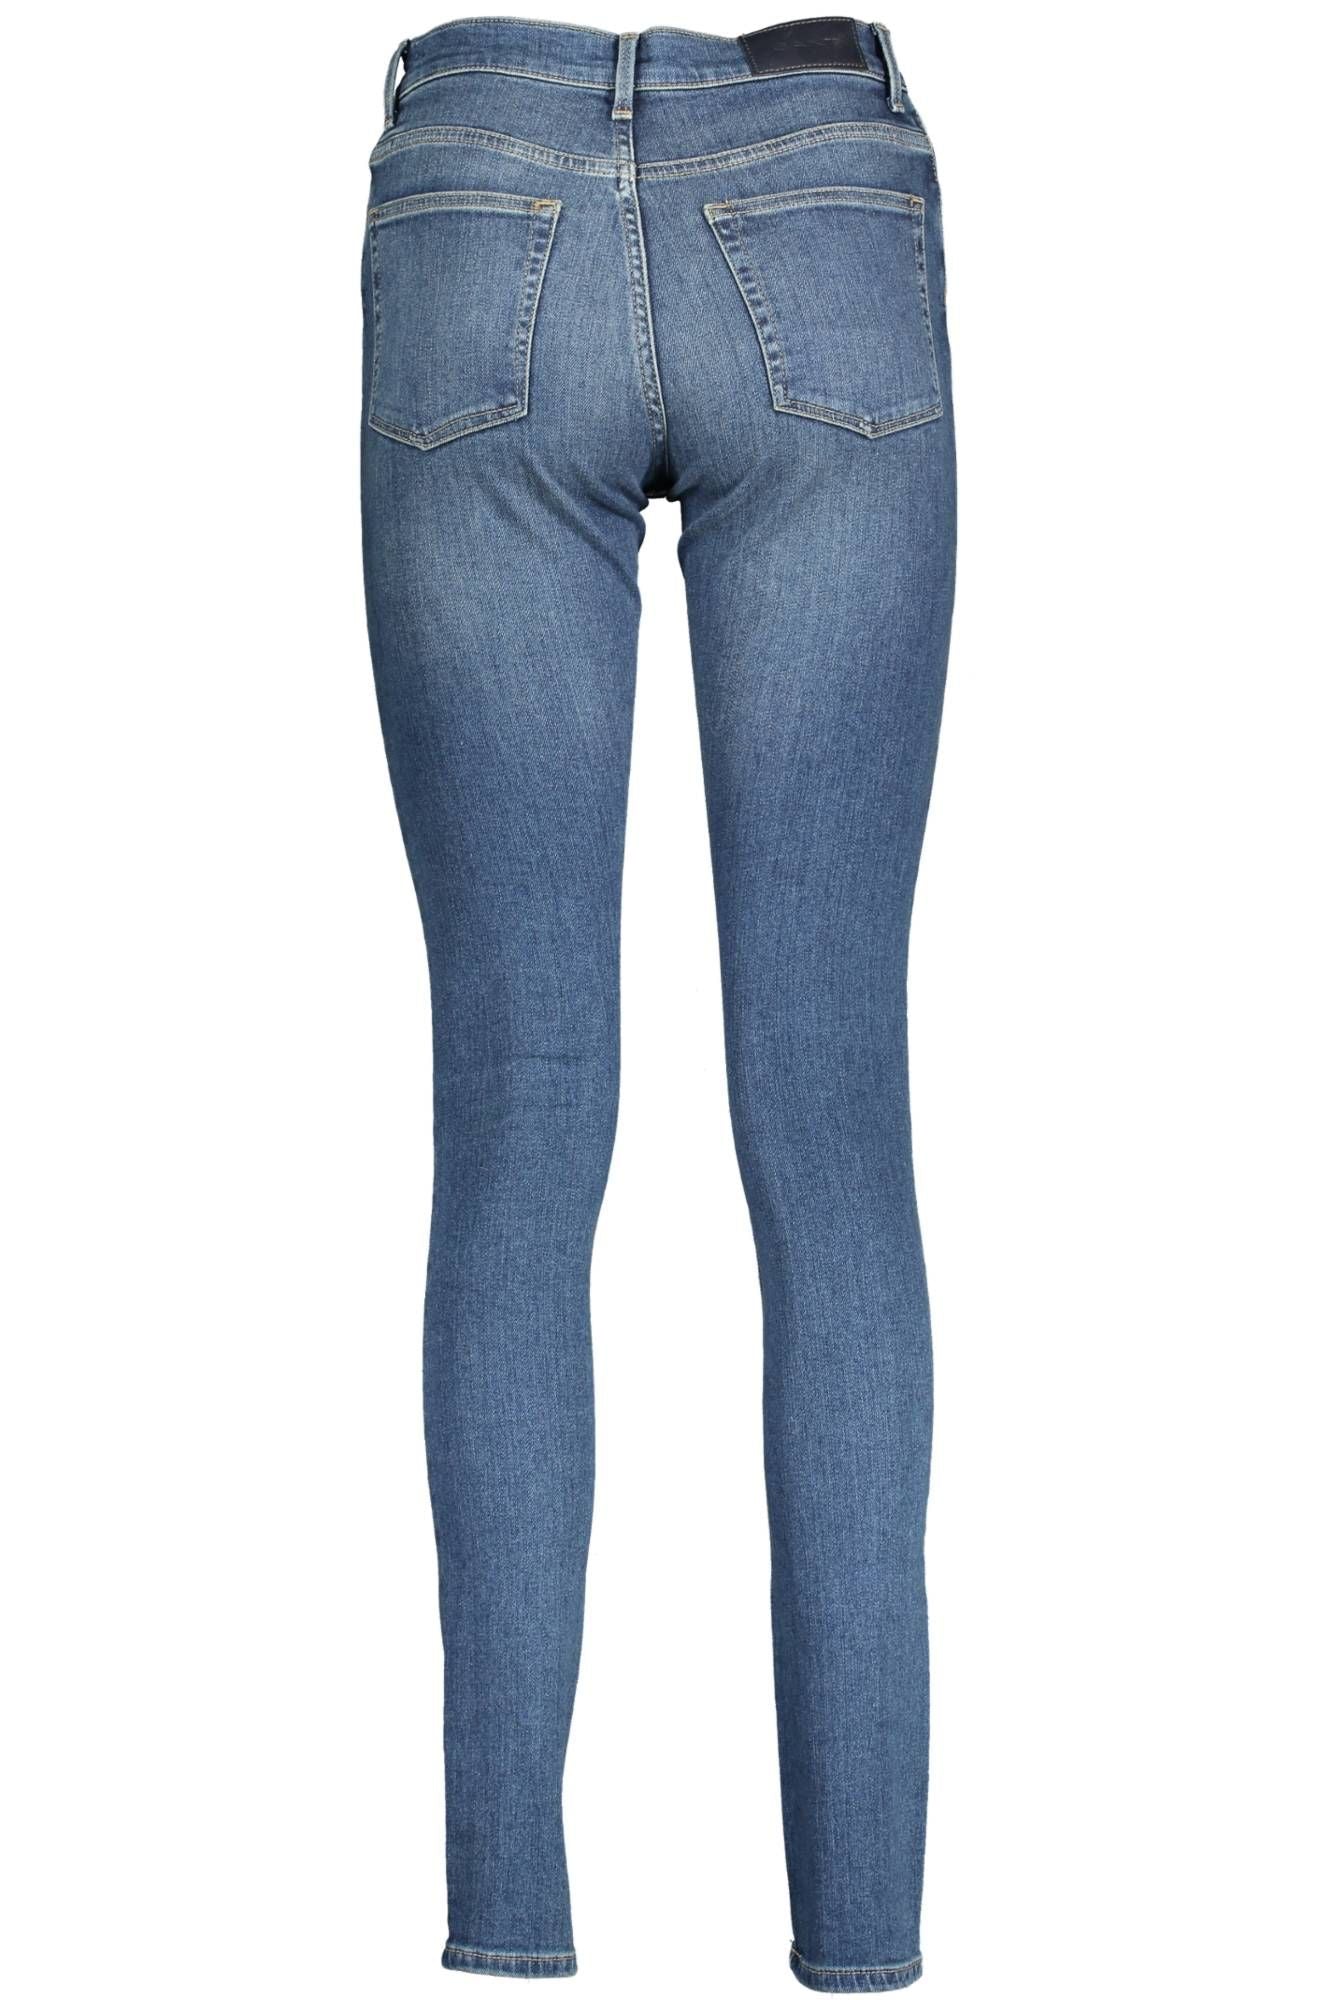 Chic Light Blue Faded Jeans for Women